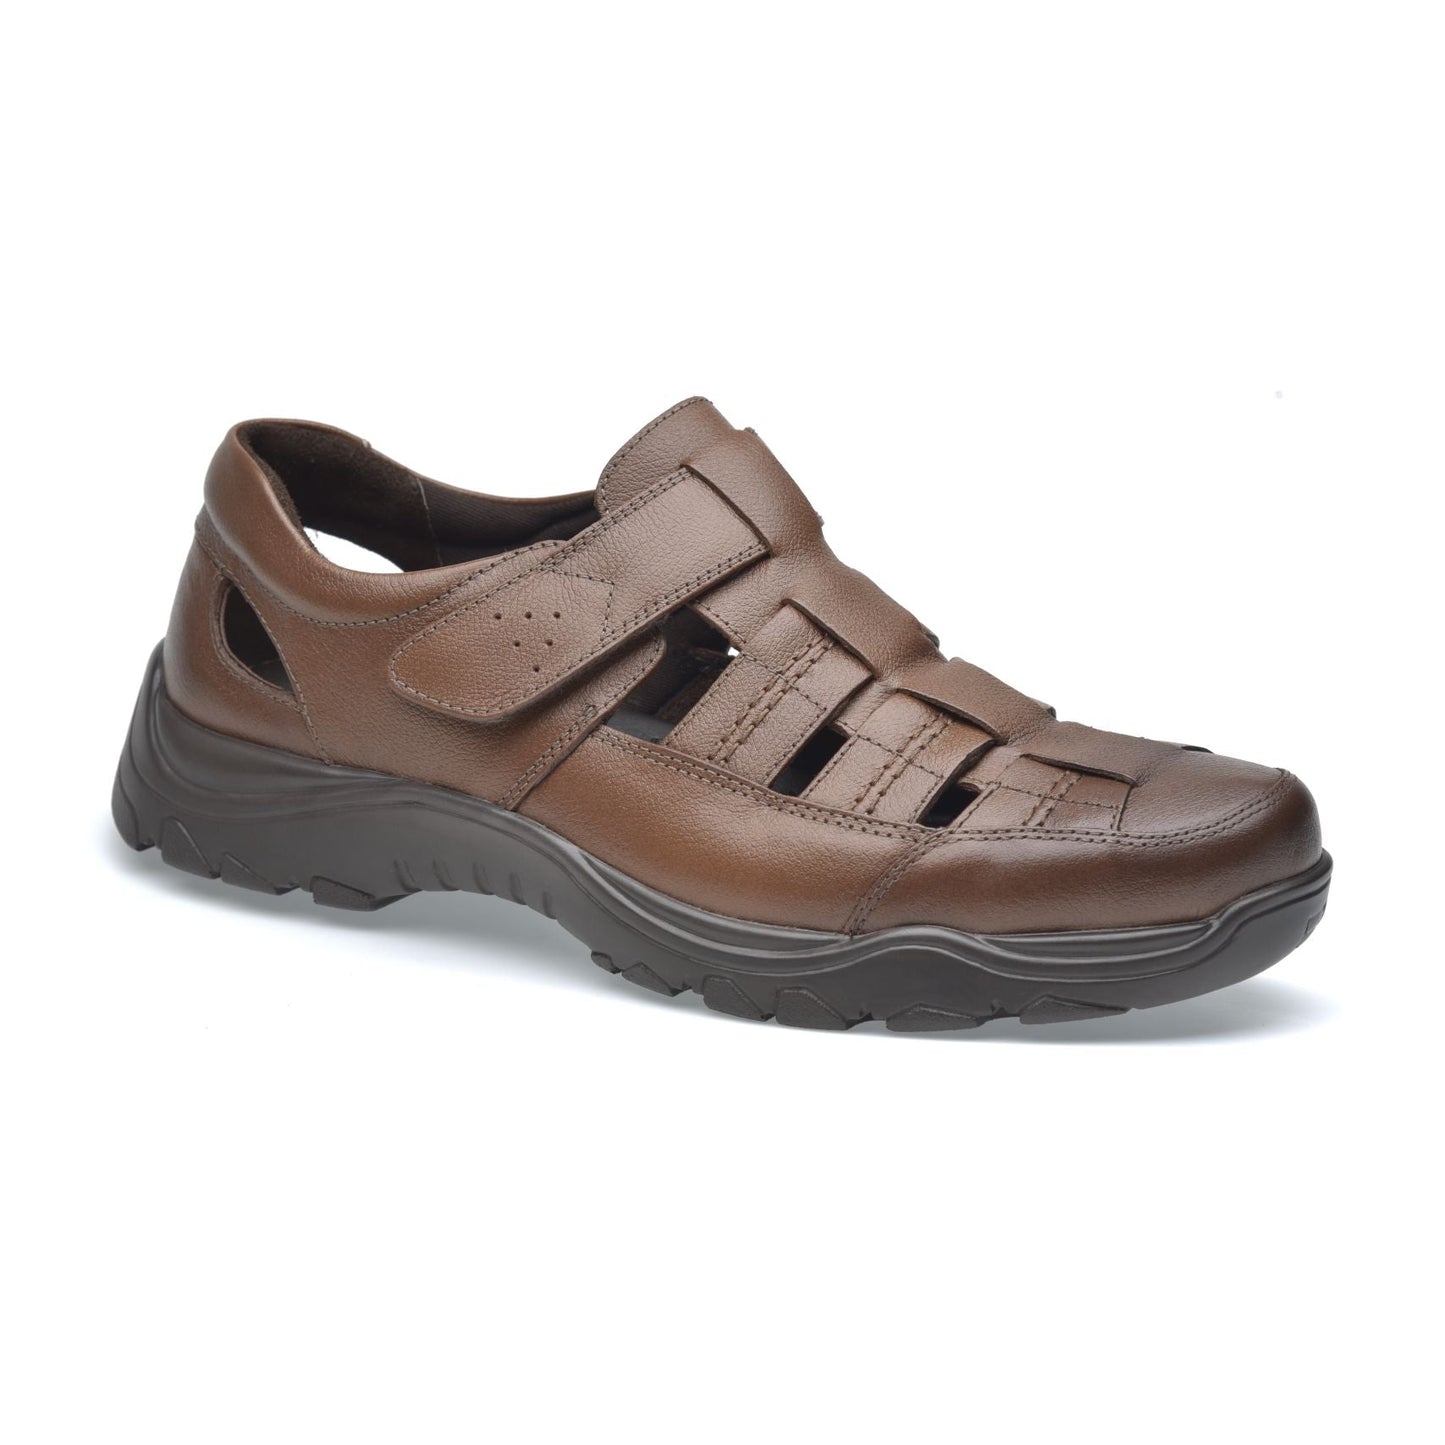 ultra comfort leather sandals for men luxury